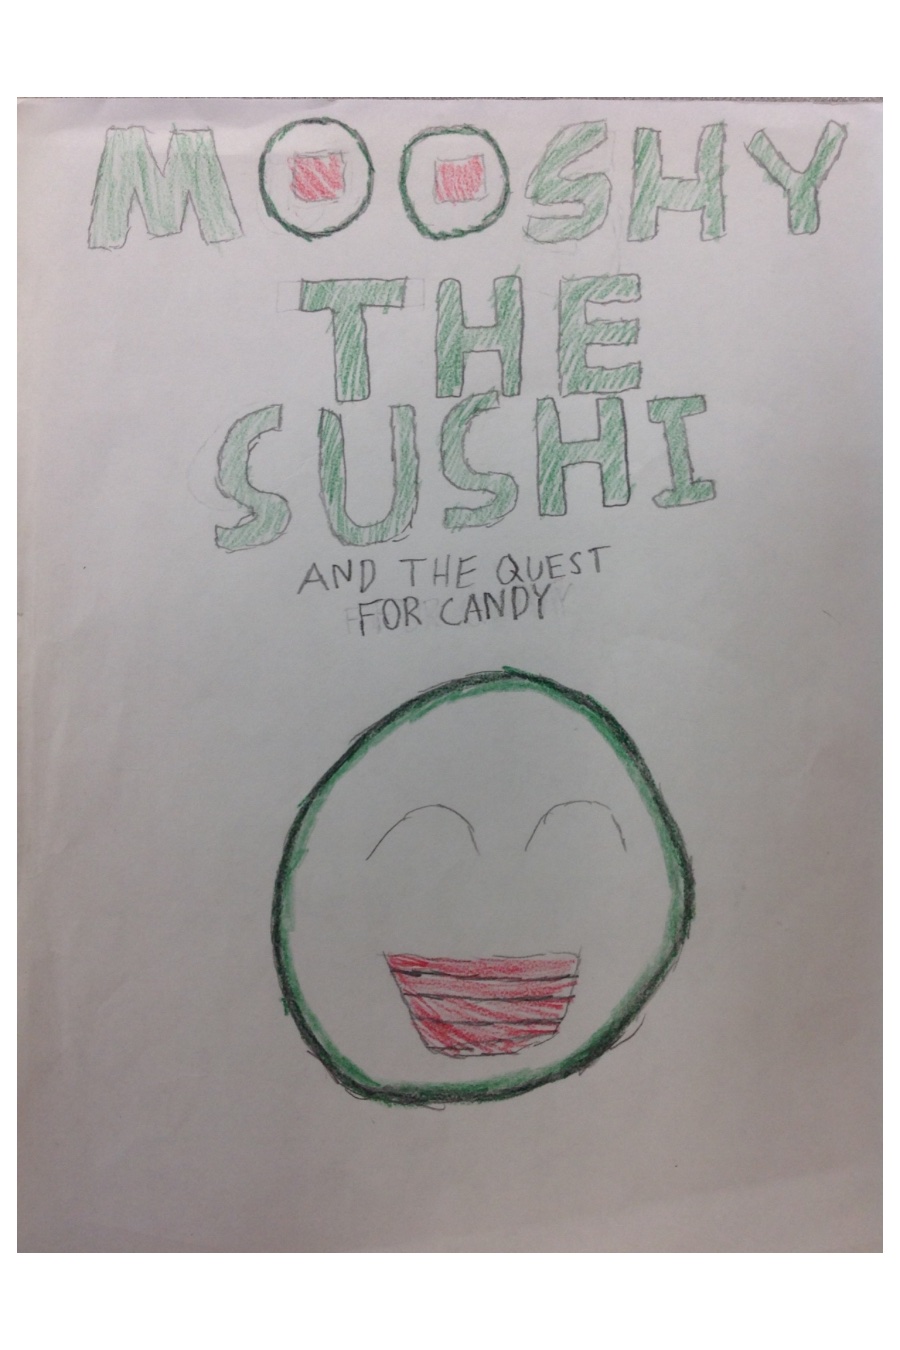 Mooshy the Sushi and his Quest for Candy by Daniel K